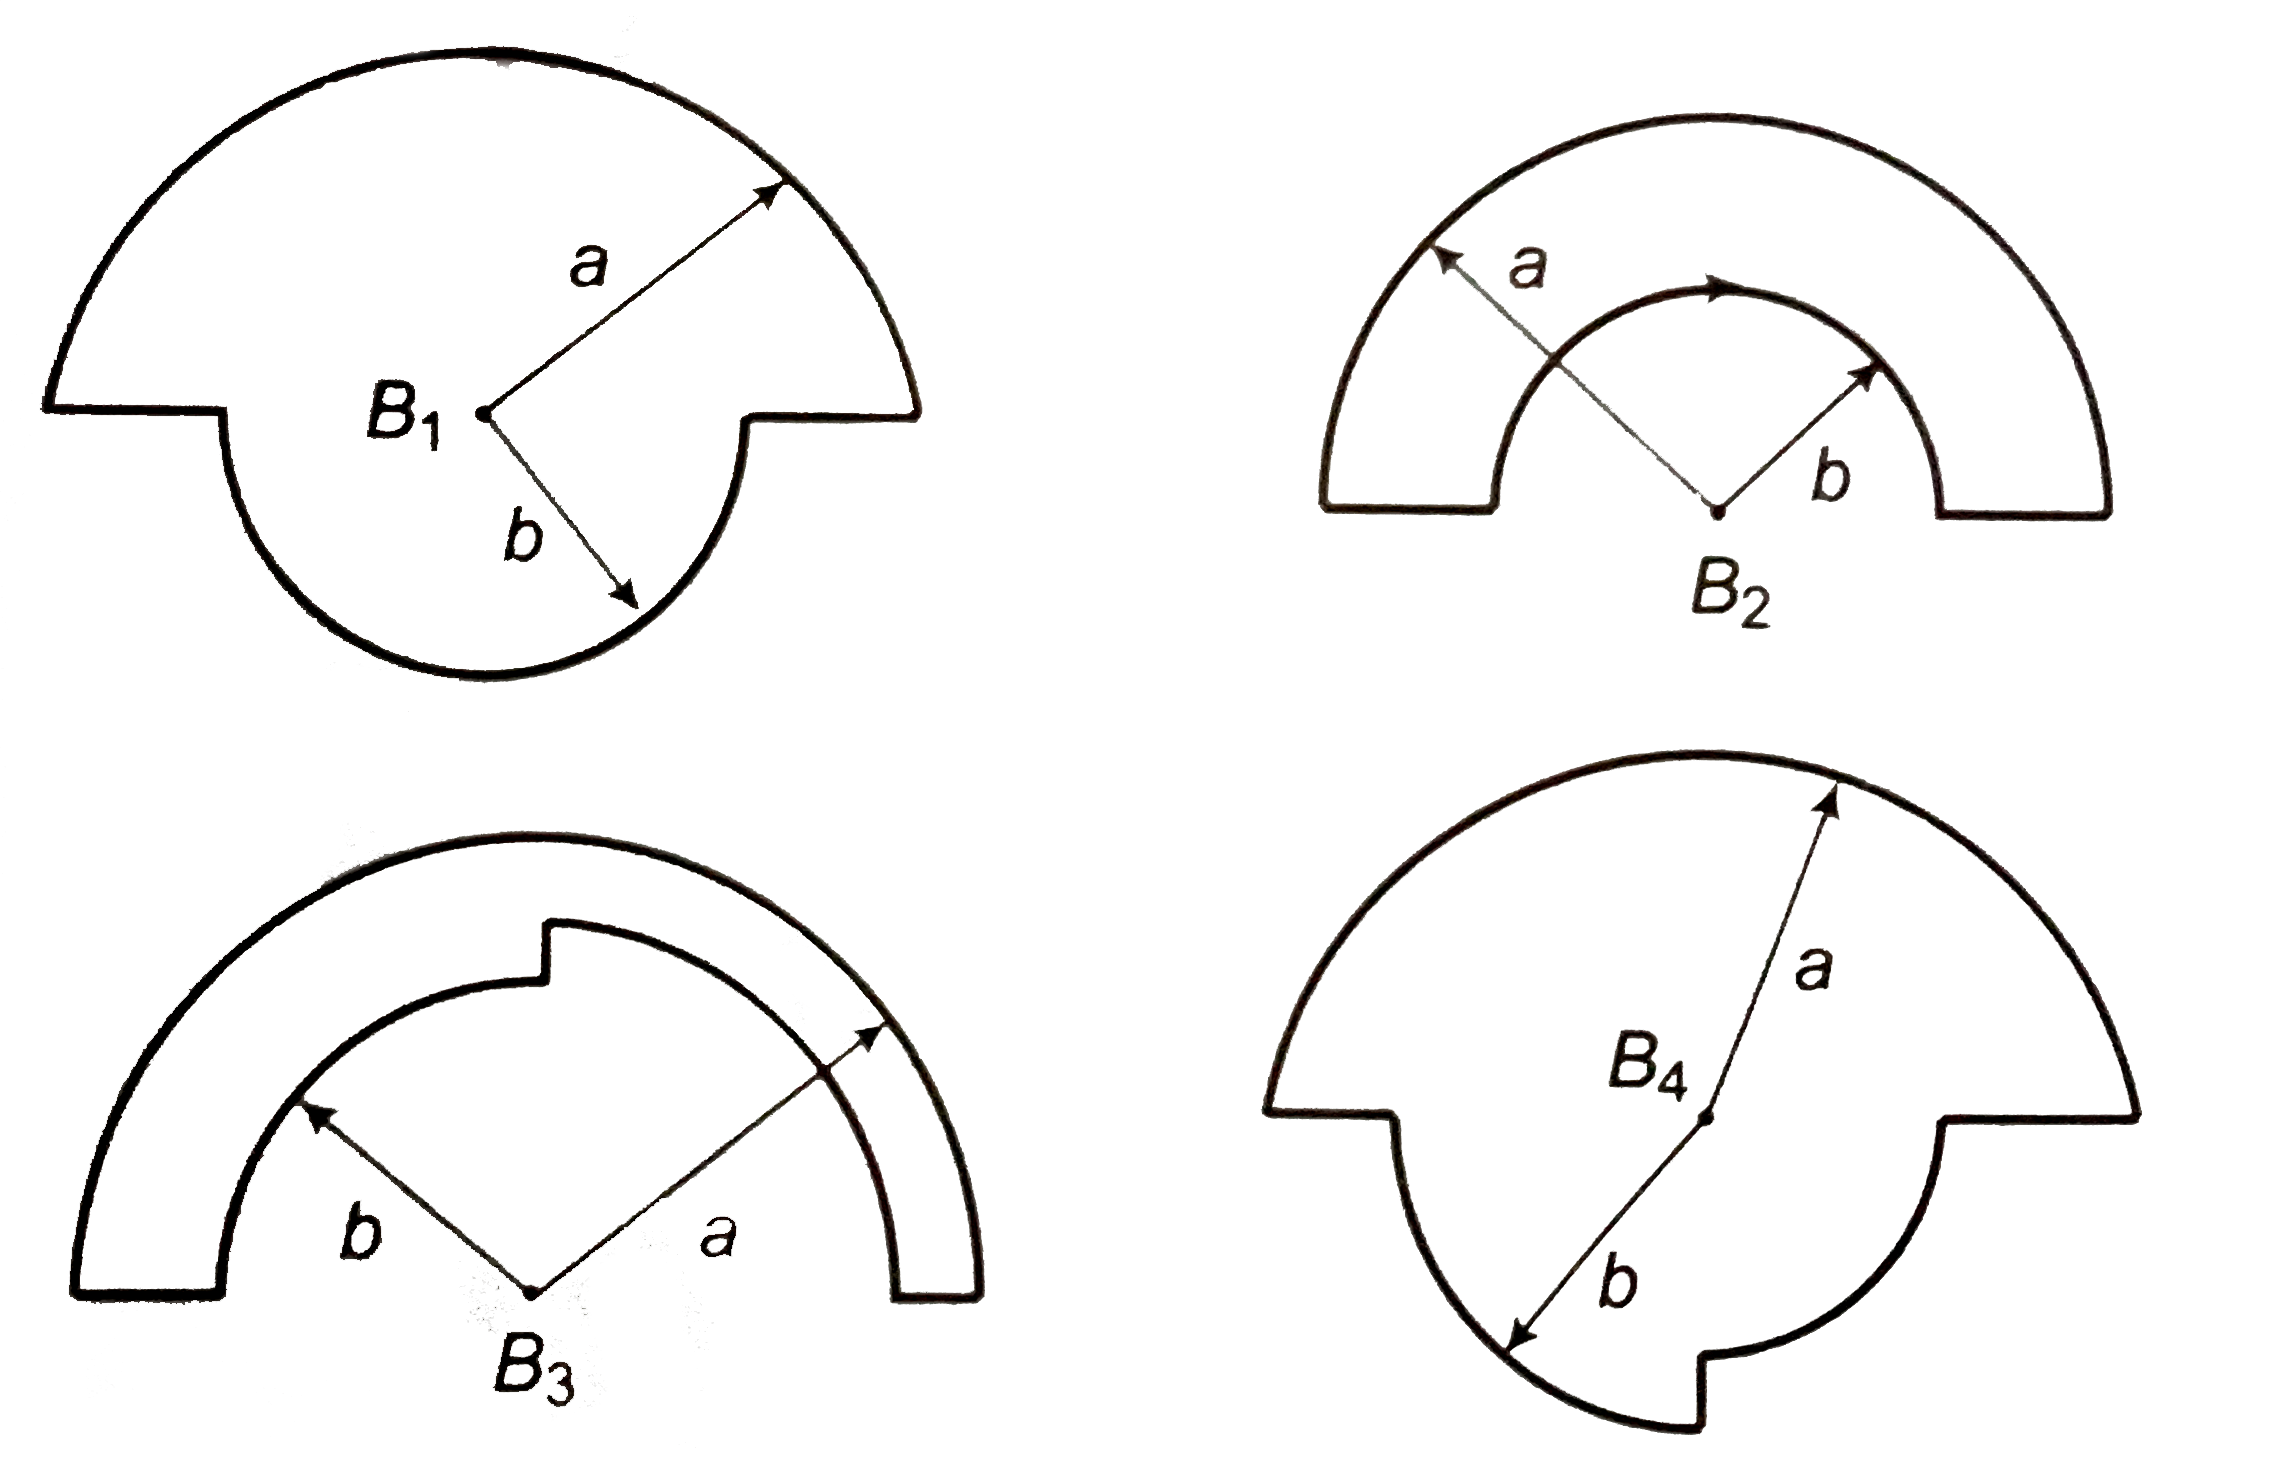 In the loop shown, all curved sections are either semicircles or quarter circles. All the loops carry the same current. The magnetic fields at the centres have magnitudes B(1),B(2),B(3) and B(4)       (i) B(4) is maximum   (ii) B(3) is minimum   (iii) B(4)gtB(1)gtB(2)gtB(3)   (iv) B(1)gtB(4)gtB(3)gtB(2)